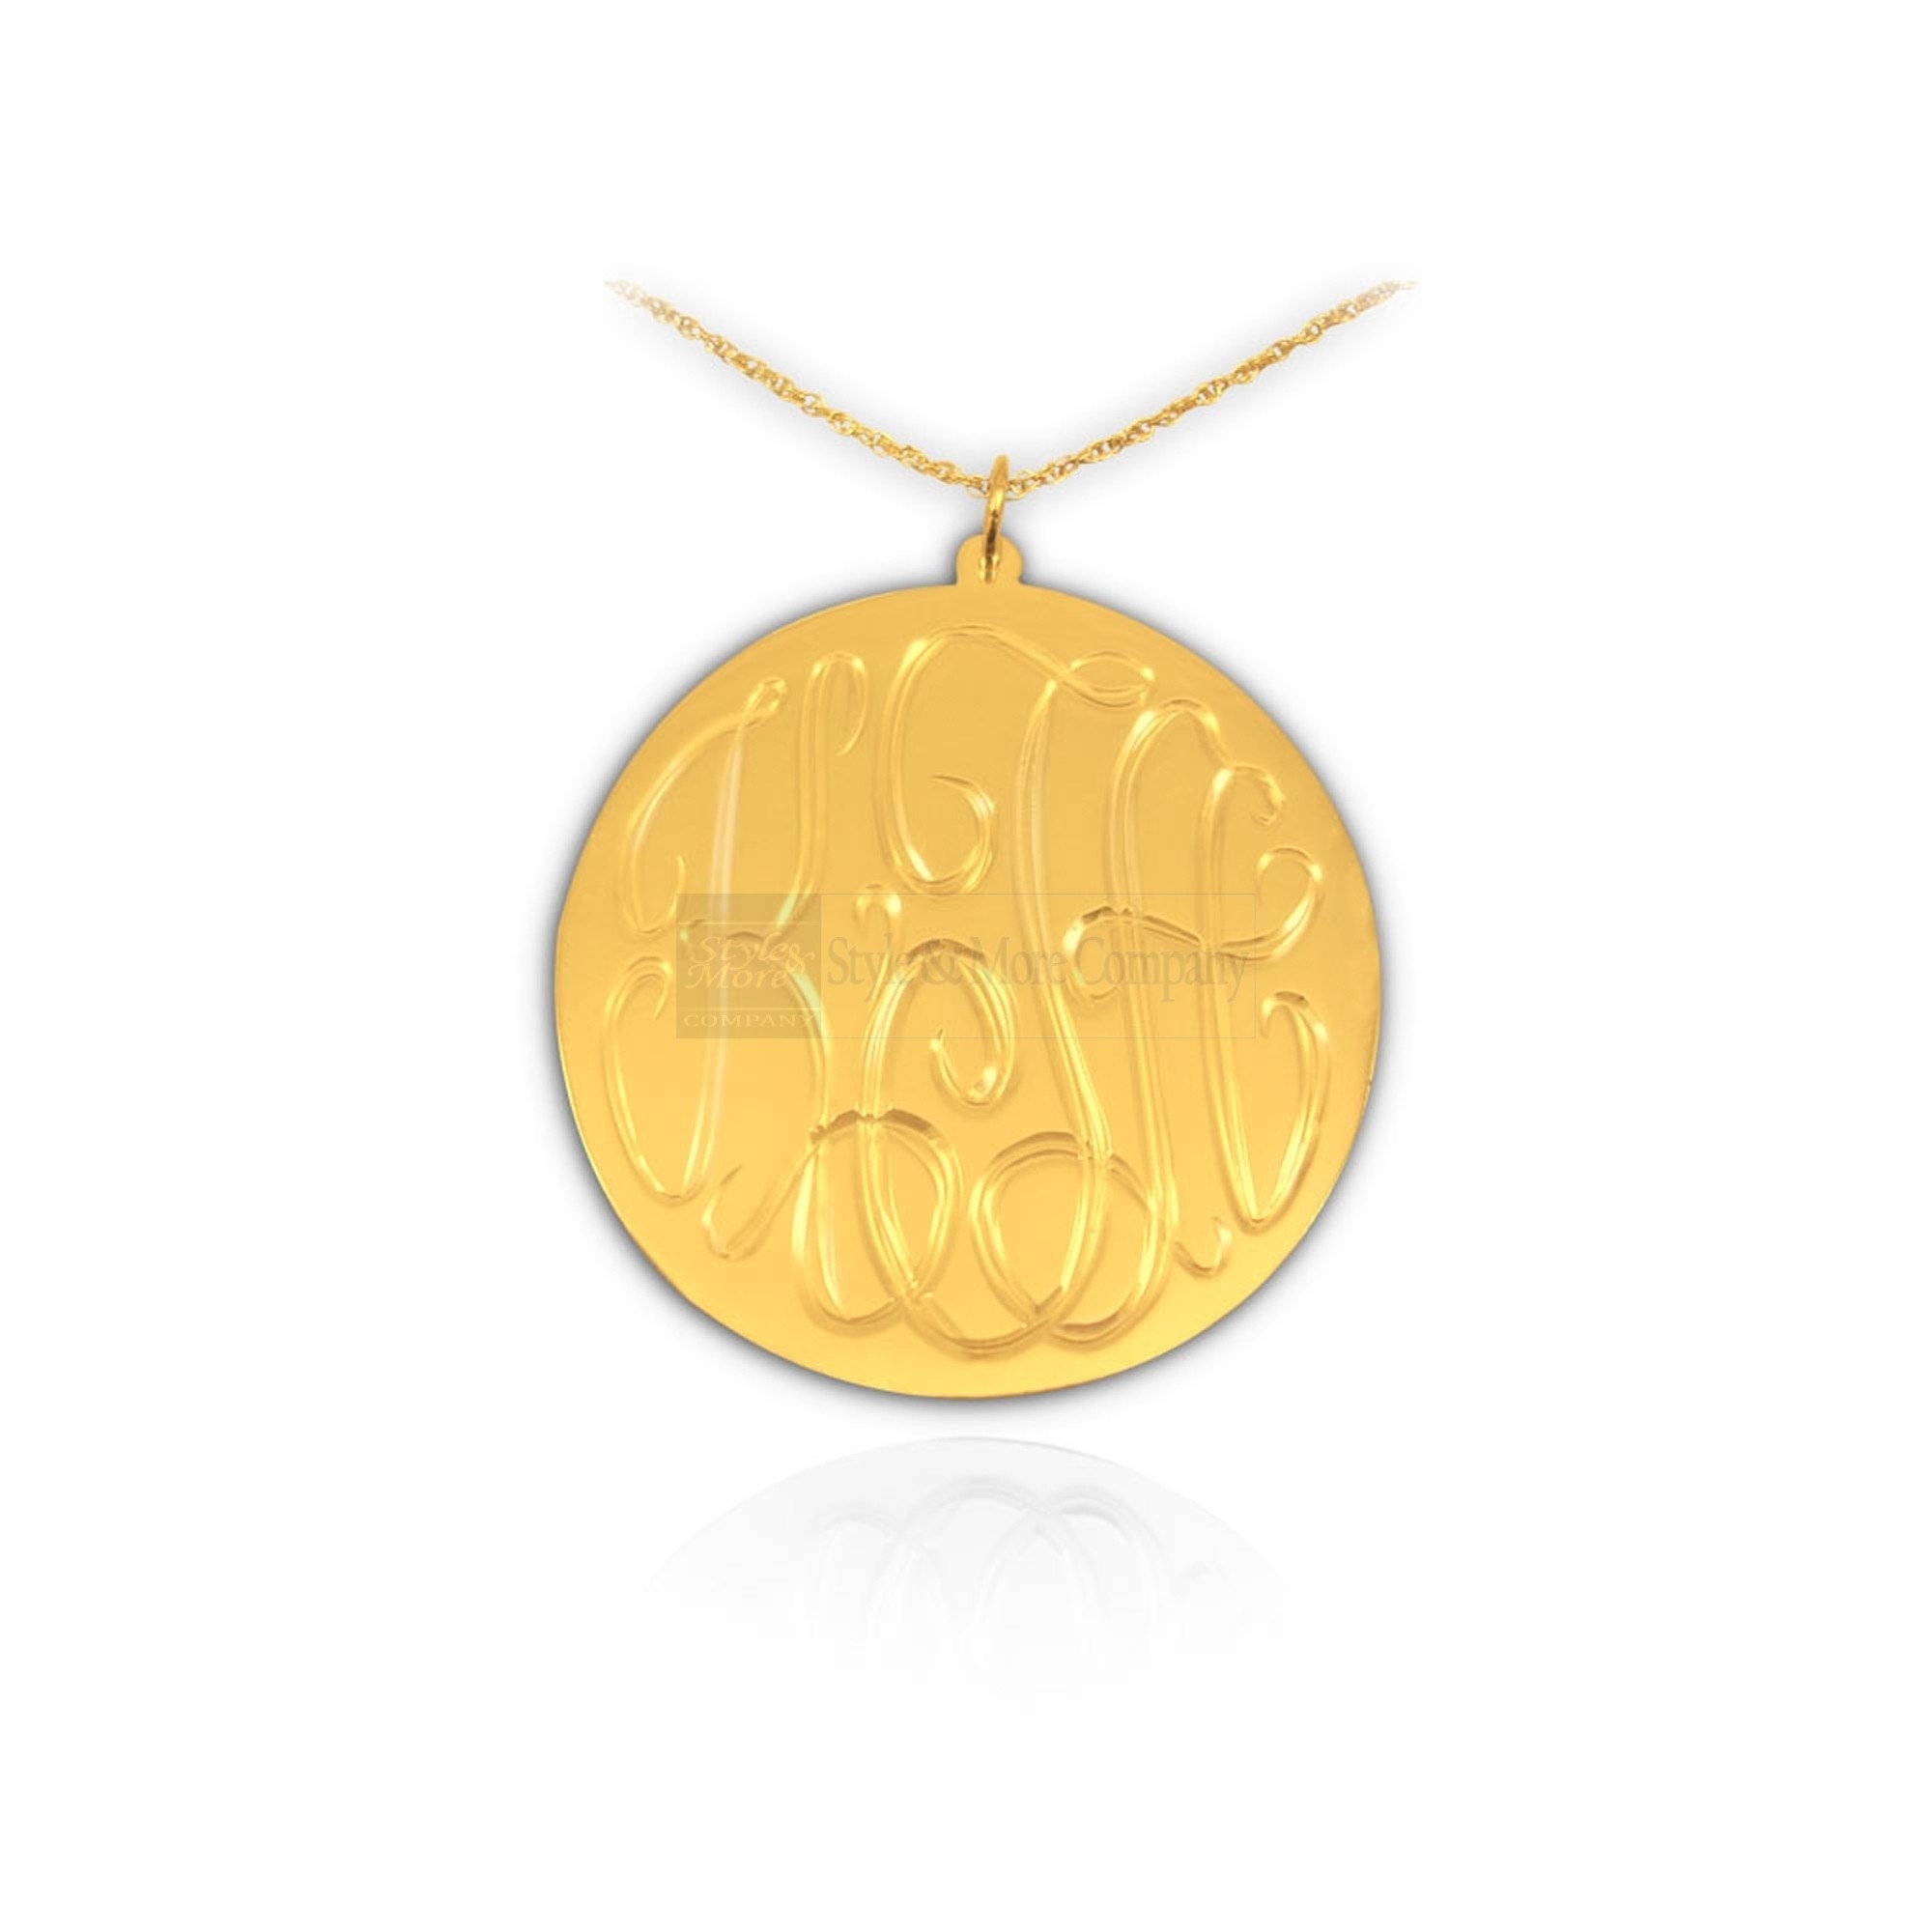 1 1/4 inch 24K Gold Plated Sterling Silver Hand Engraved Personalized Initial Necklace